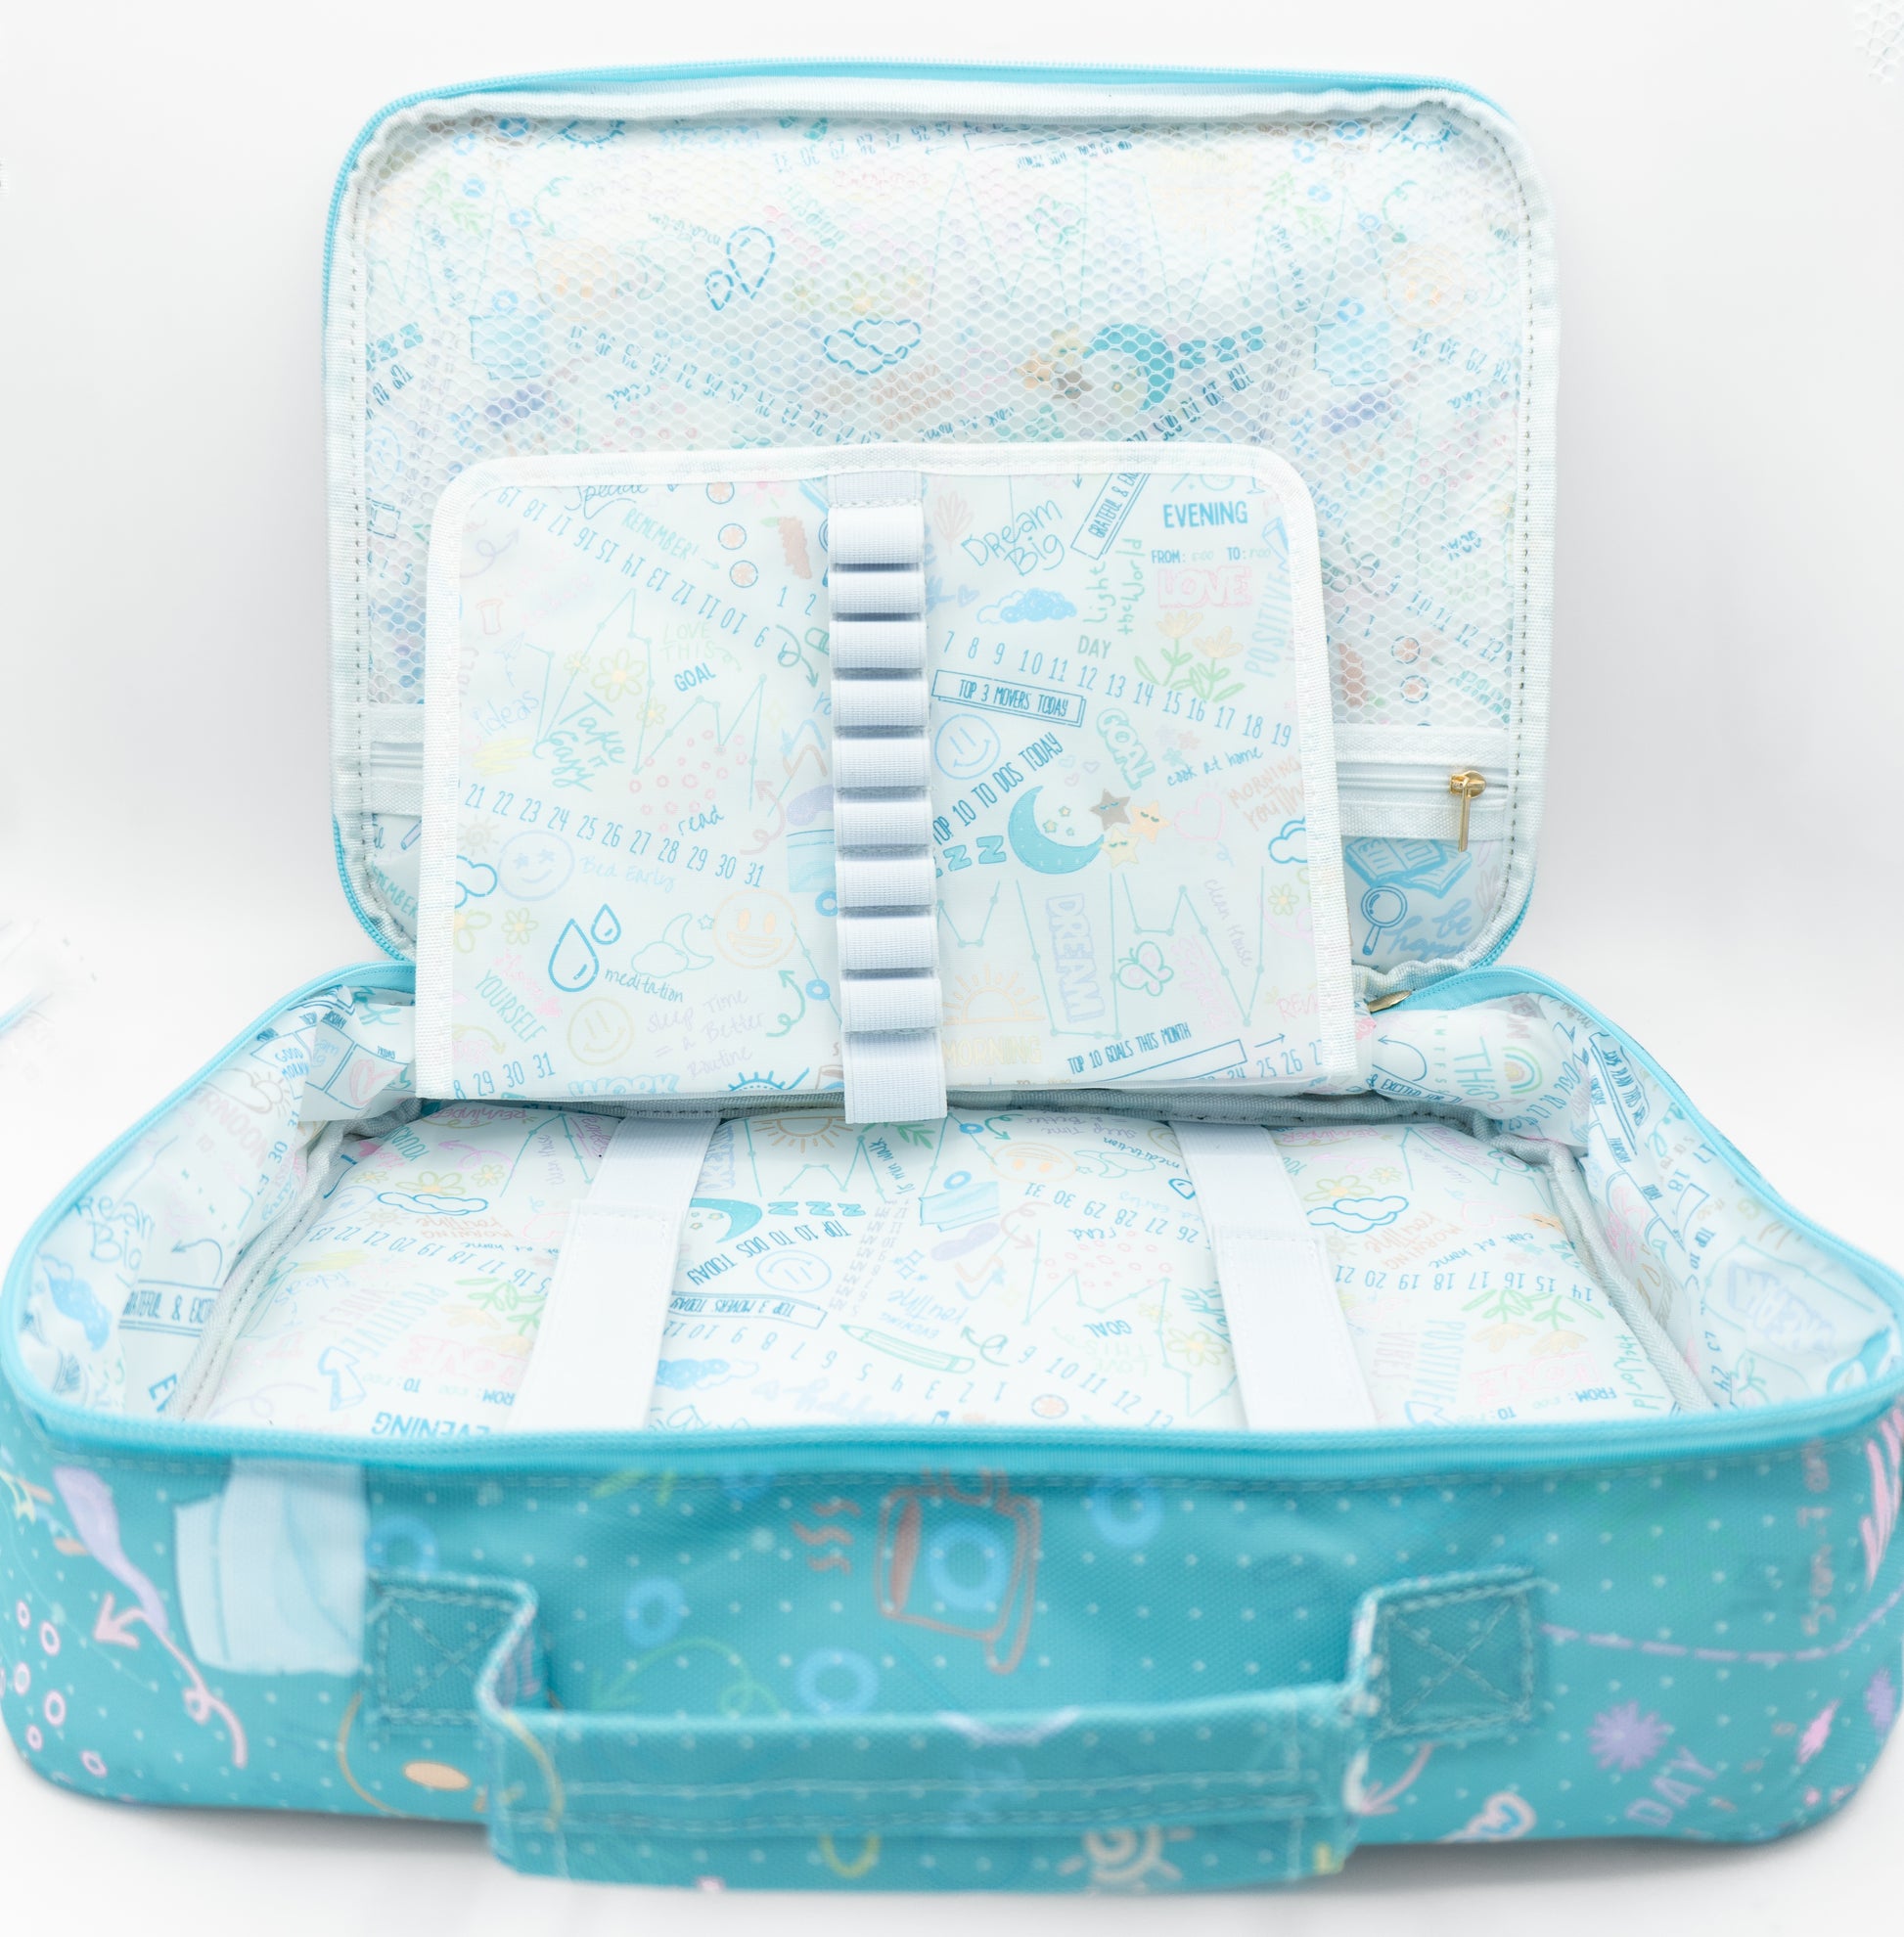 Inside view of teal travel planner case